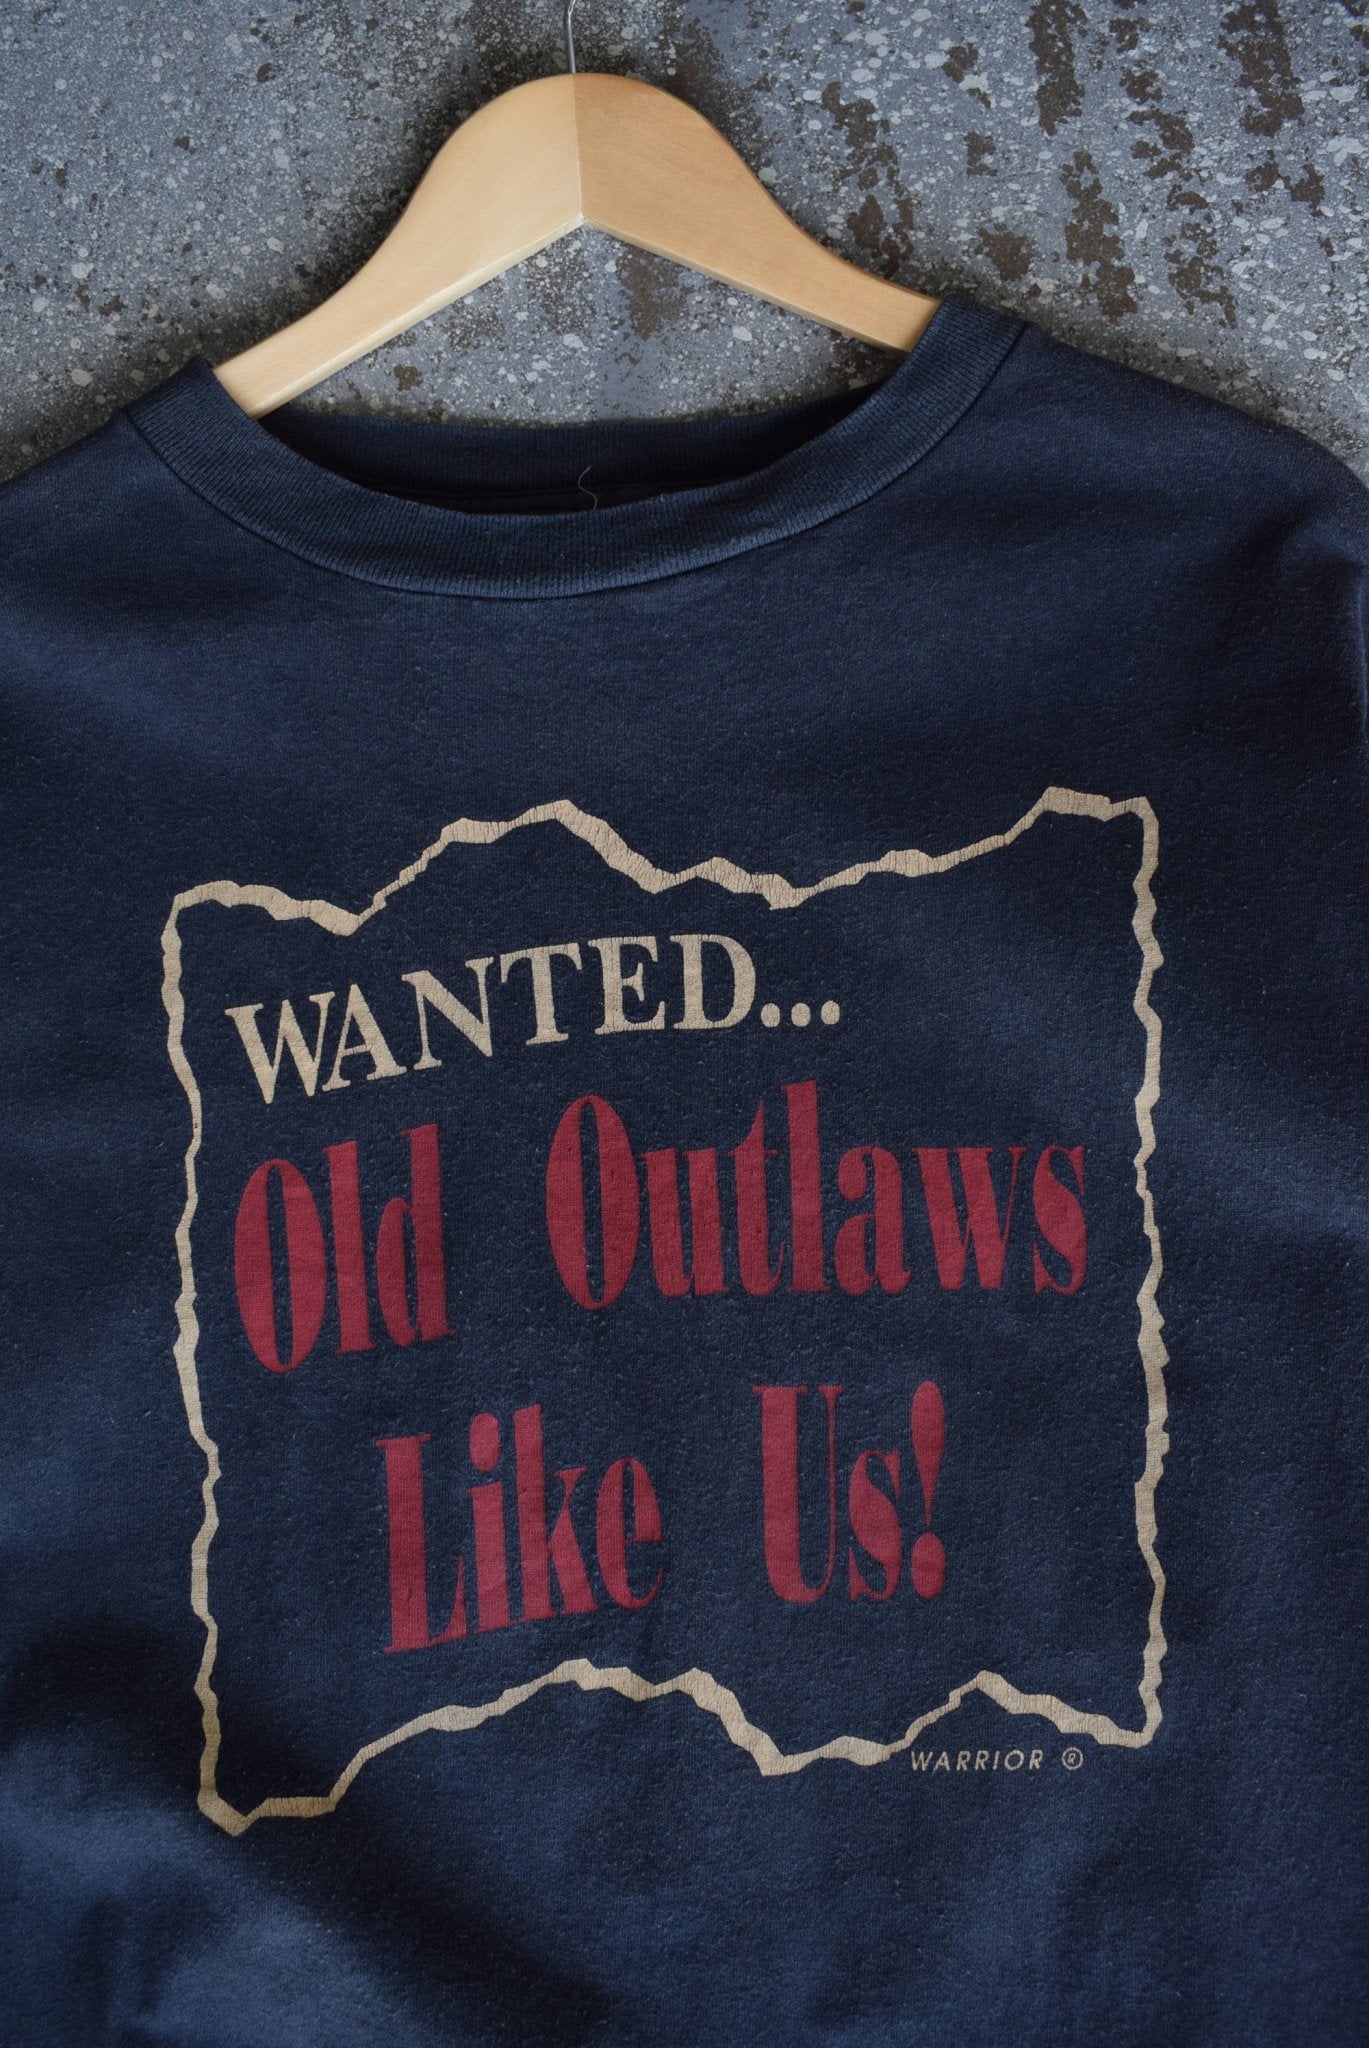 Vintage 90s Old Outlaws Motorcycle Tee (L/XL) - Retrospective Store